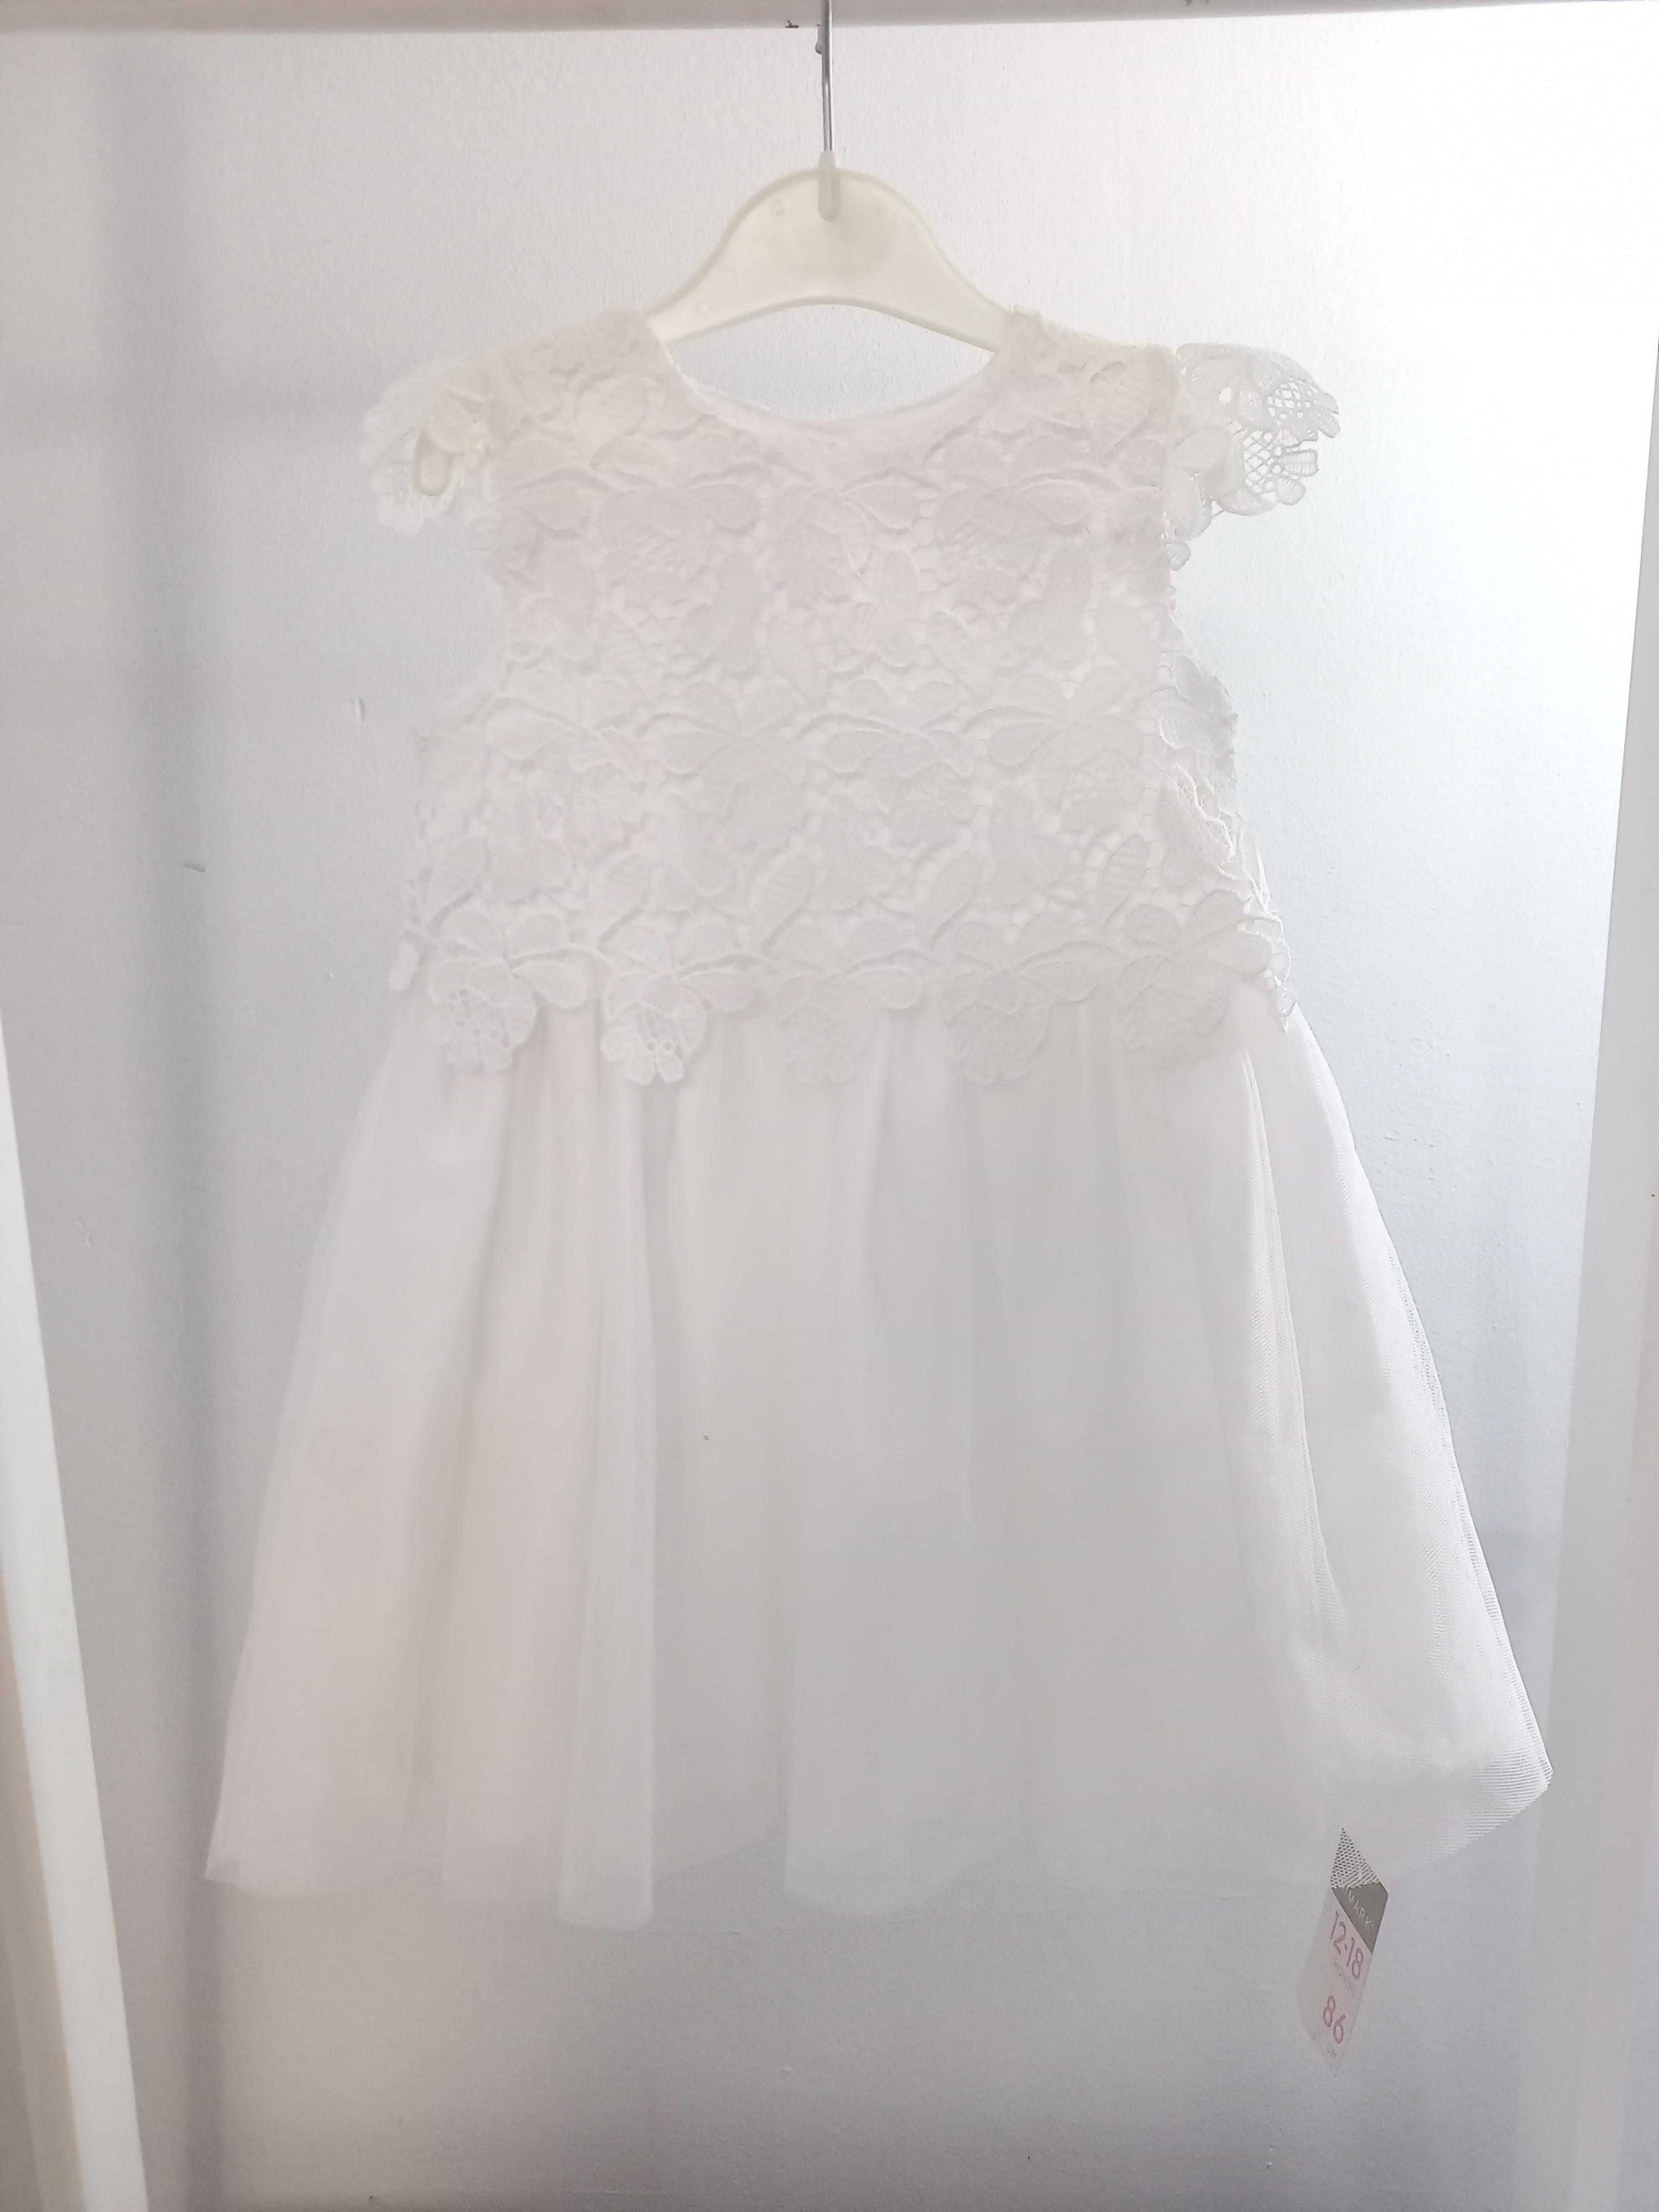 Special Occasion Dress size: 18-24 Months - The Swoondle Society